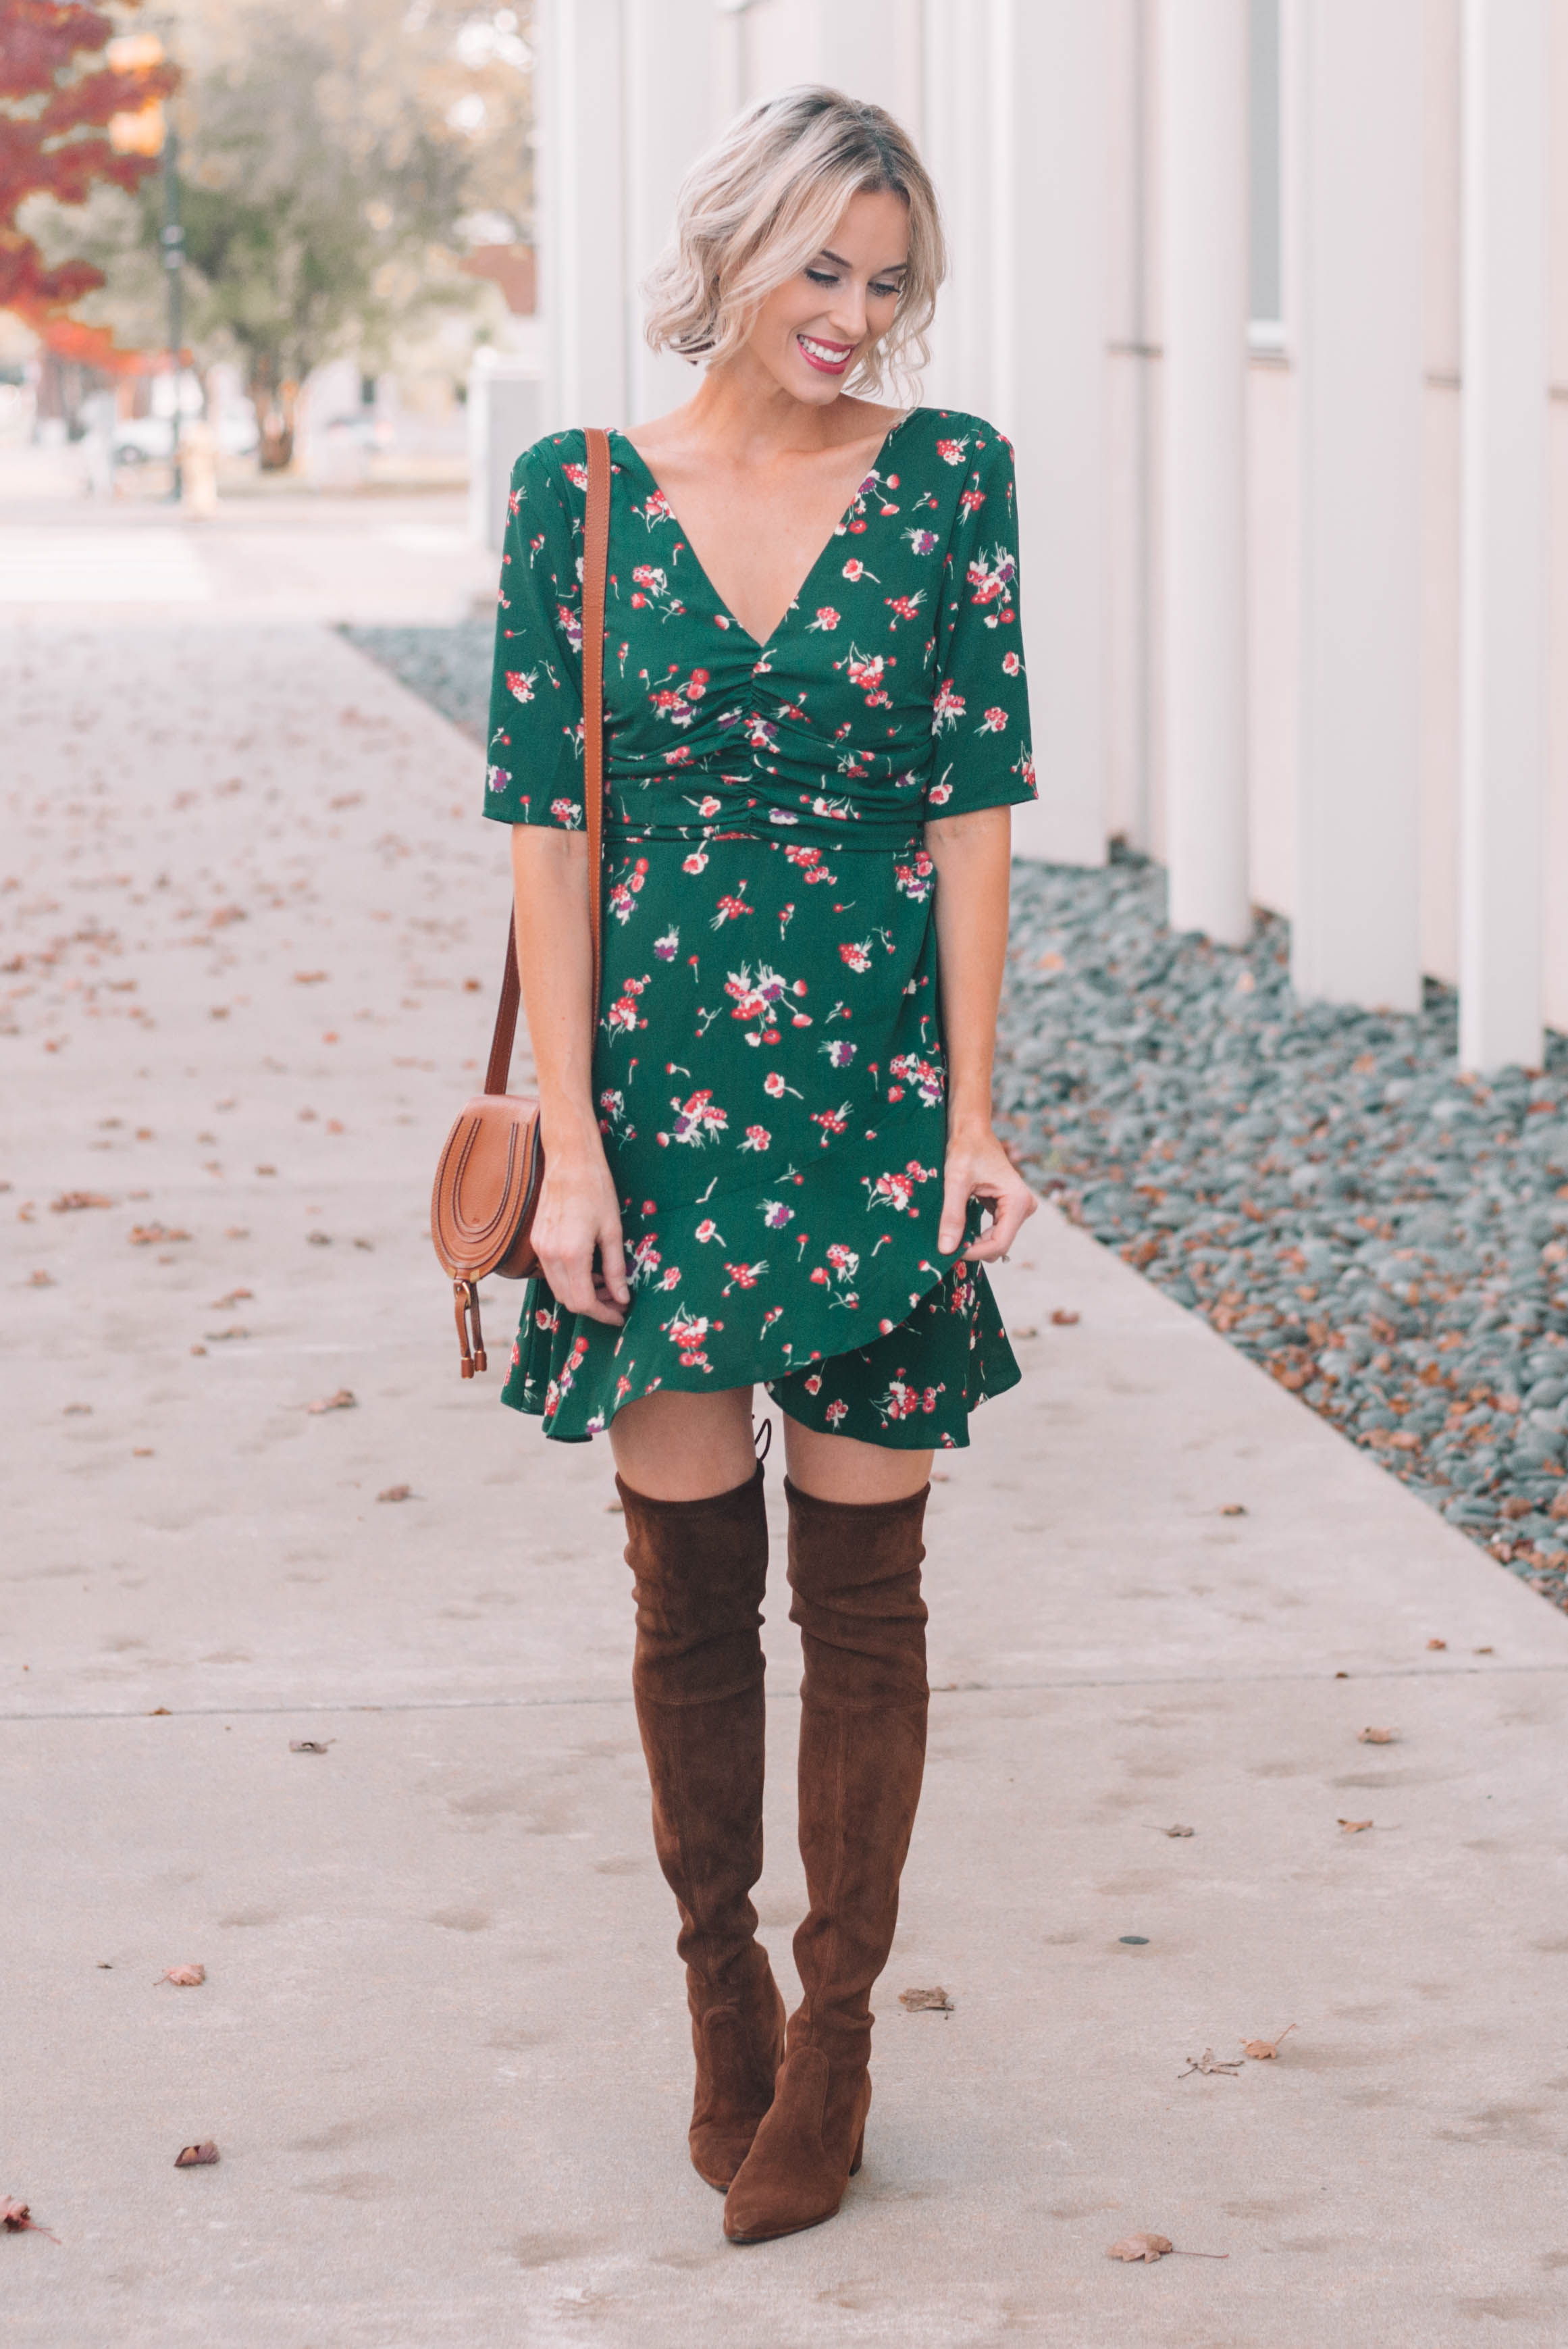 dress over the knee boots